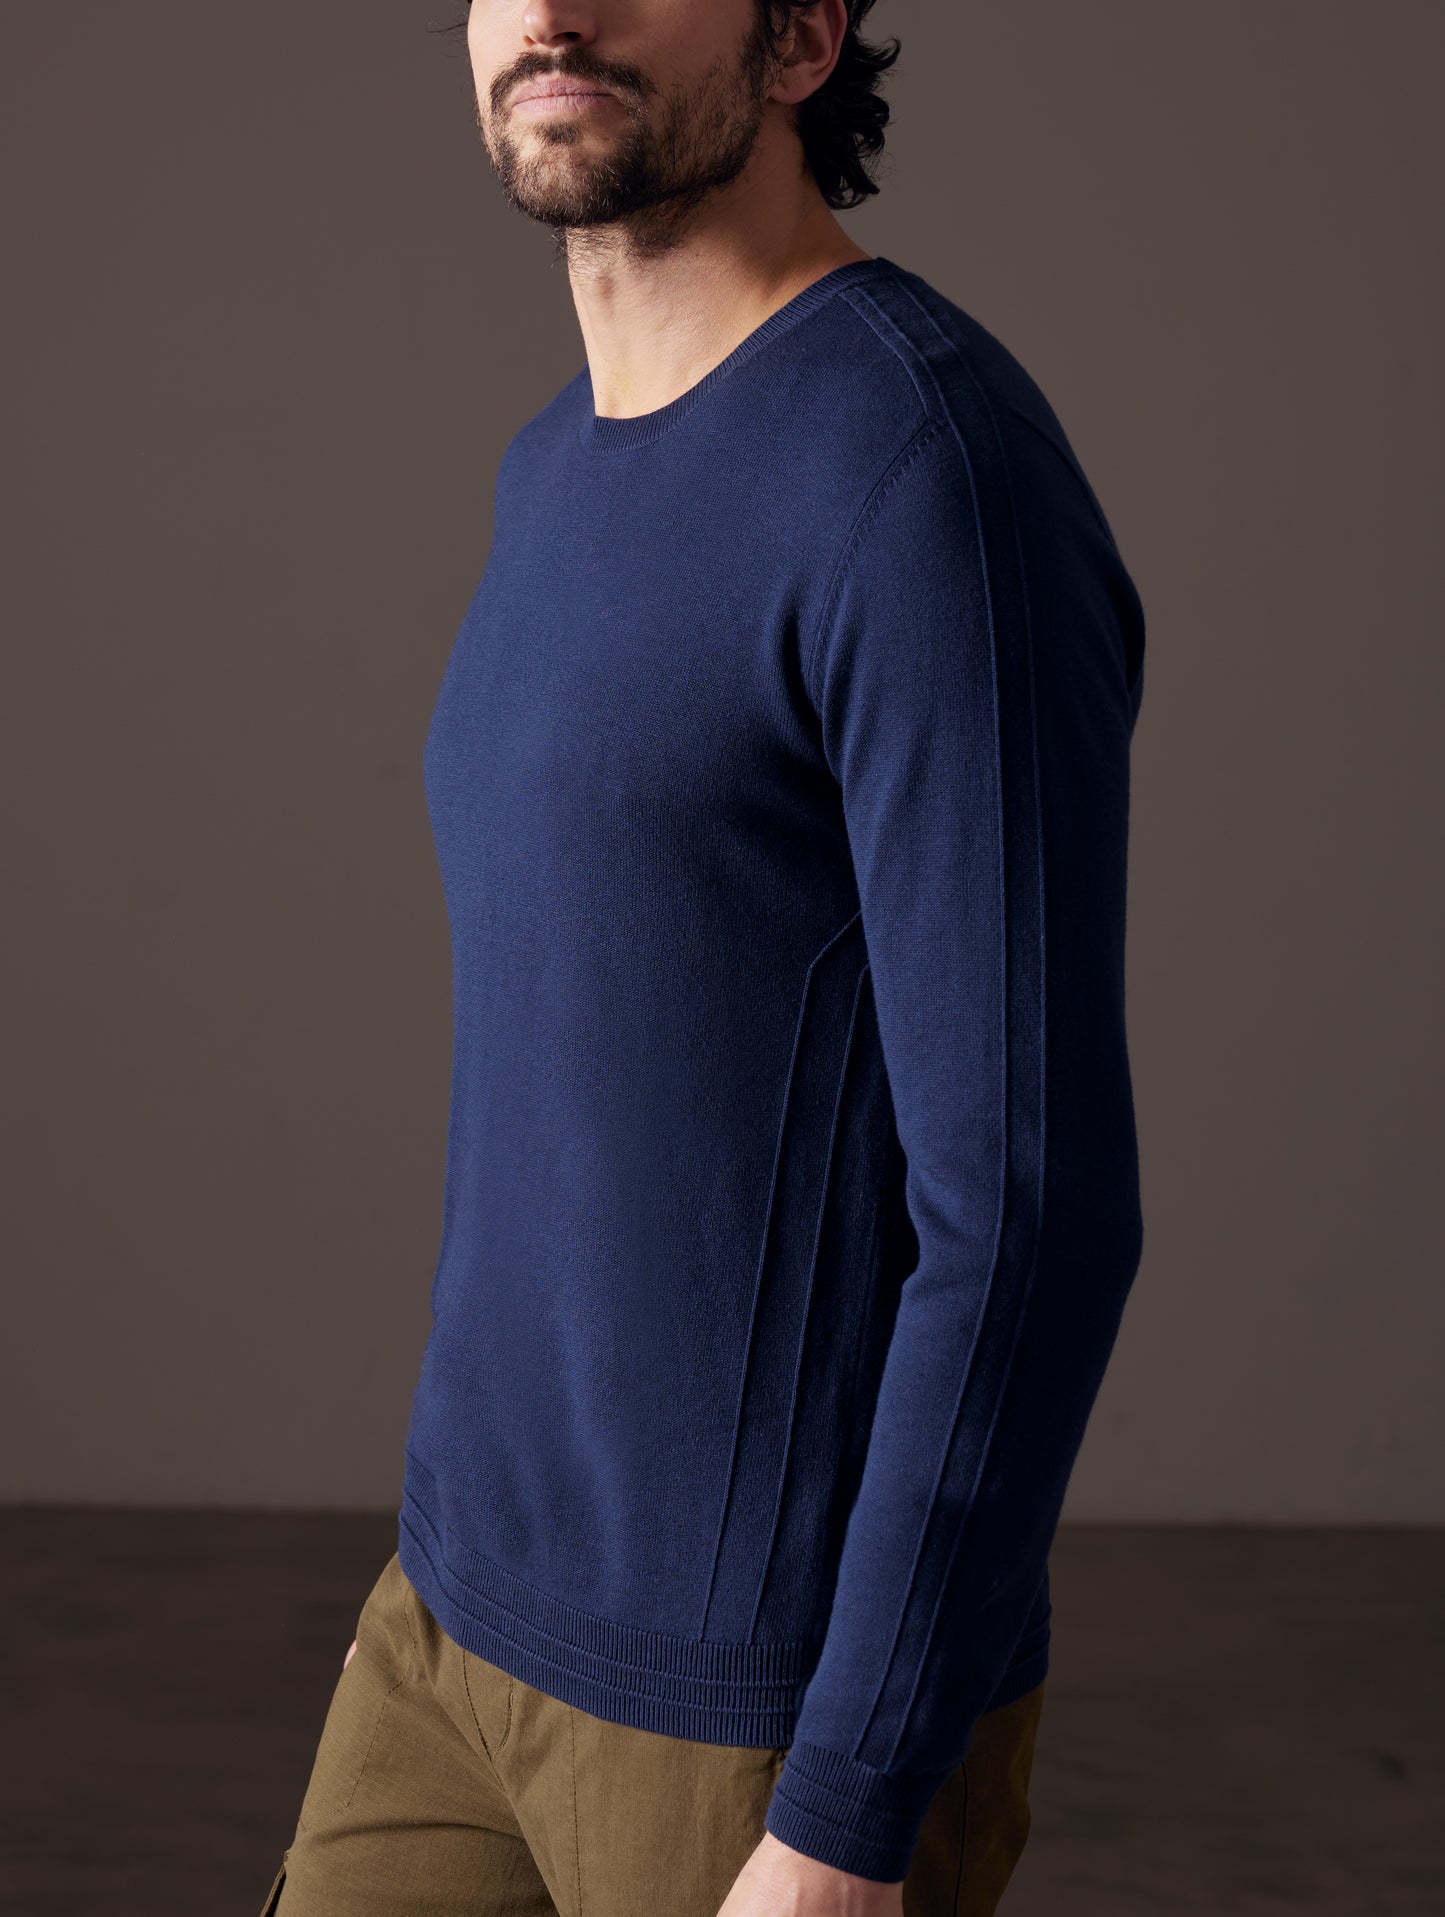 Man wearing blue sweater from AETHER Apparel